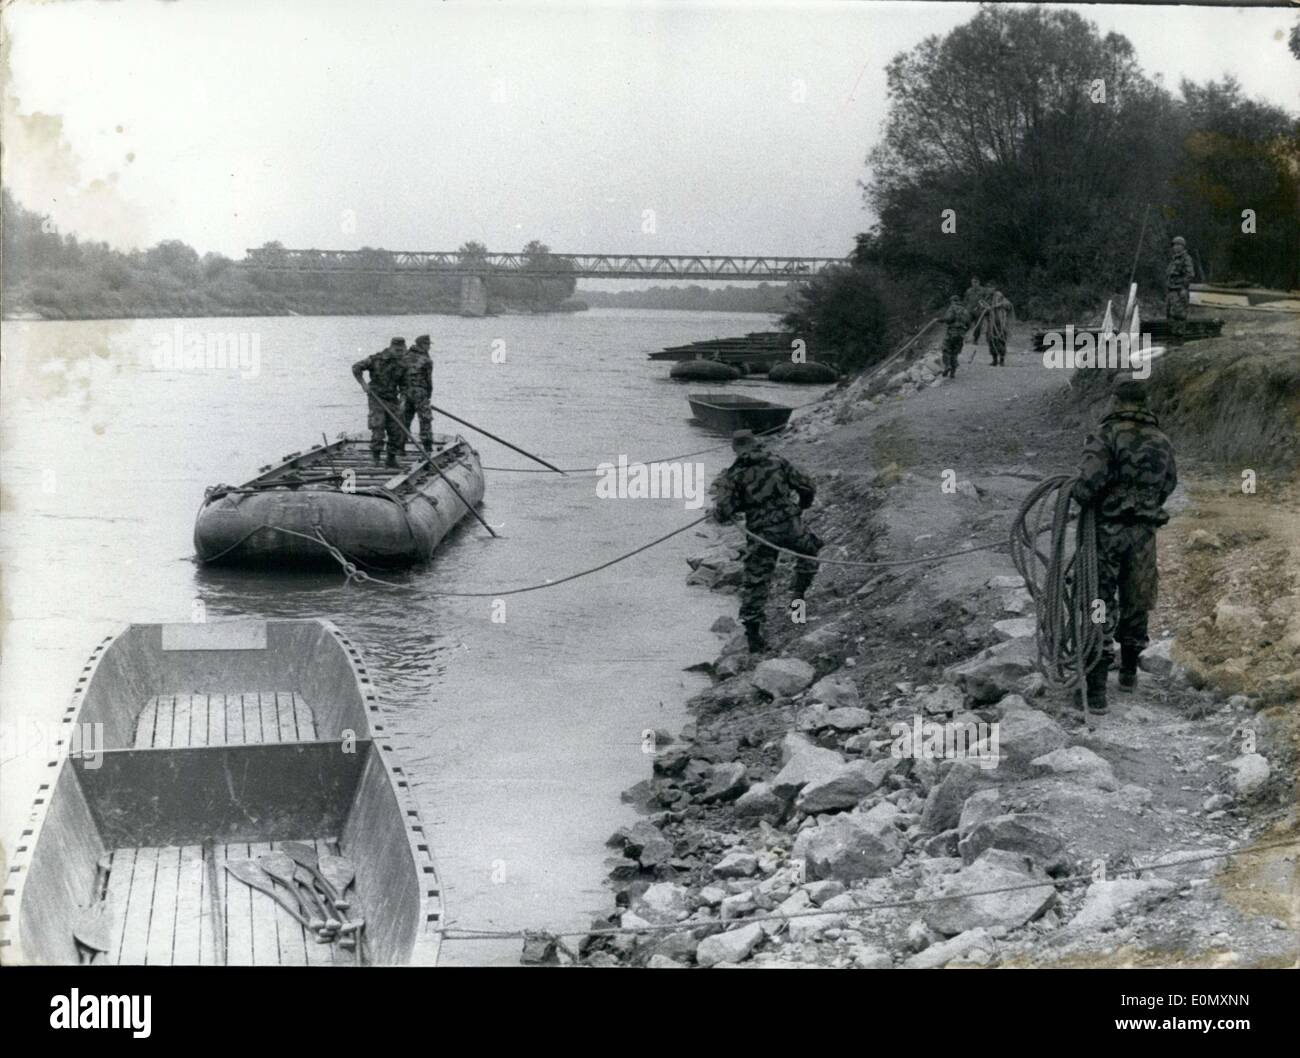 Oct. 30, 1956 - The Munich Pioneers Teaching Battalion laid a pontoon bridge across the Donau/Danube near Ingolstadt. It was the first time, post WW2, that the pioneers had taken up an exercise like this. Our picture shows a moment in the laying of the bridge, which was 100m long and took 50 minutes to build. Stock Photo